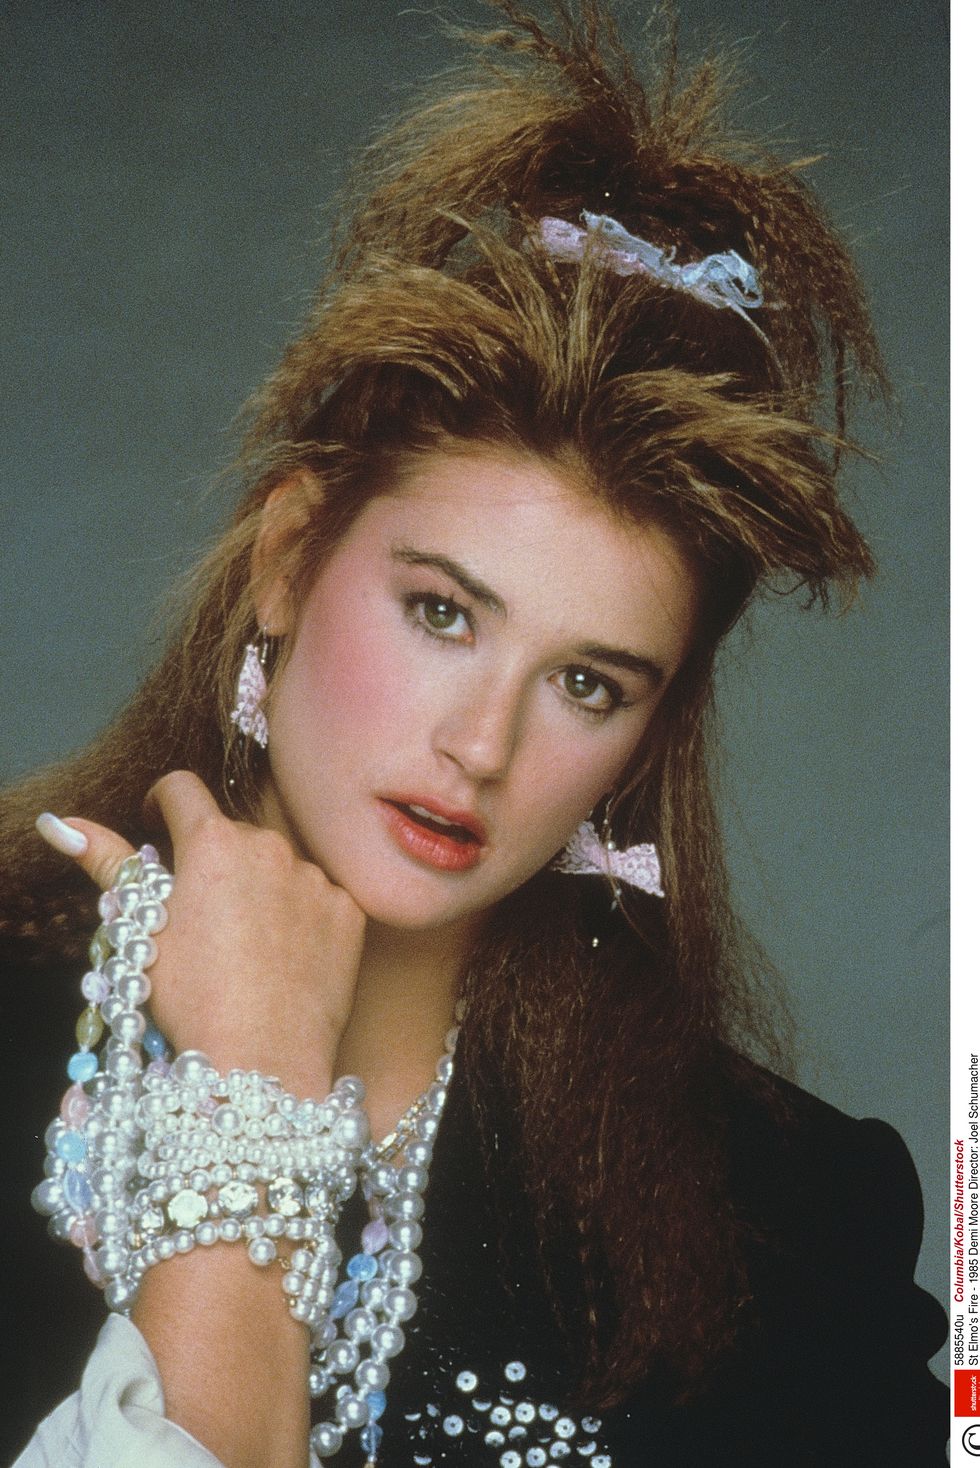 23 Unforgettable 80s Fashion Trends That Are Popular Nowadays